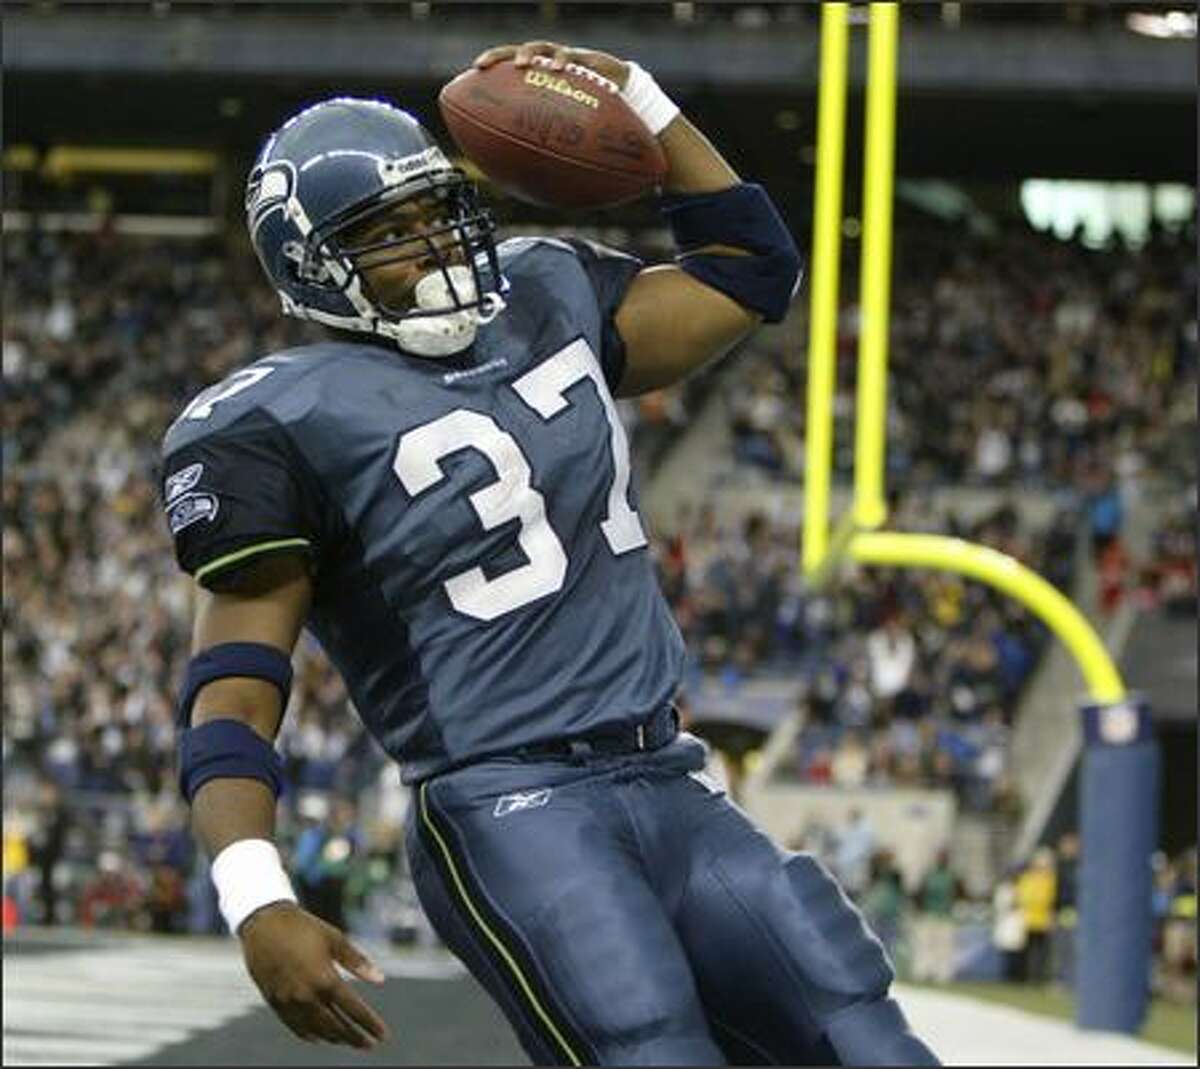 Shaun Alexander goes into his "sprinkler" routine to celebrate his 5-yard touchdown run during the first quarter against the Houston Texans on October 16, 2005. He also scored on runs of 4, 1 and 23 yards.